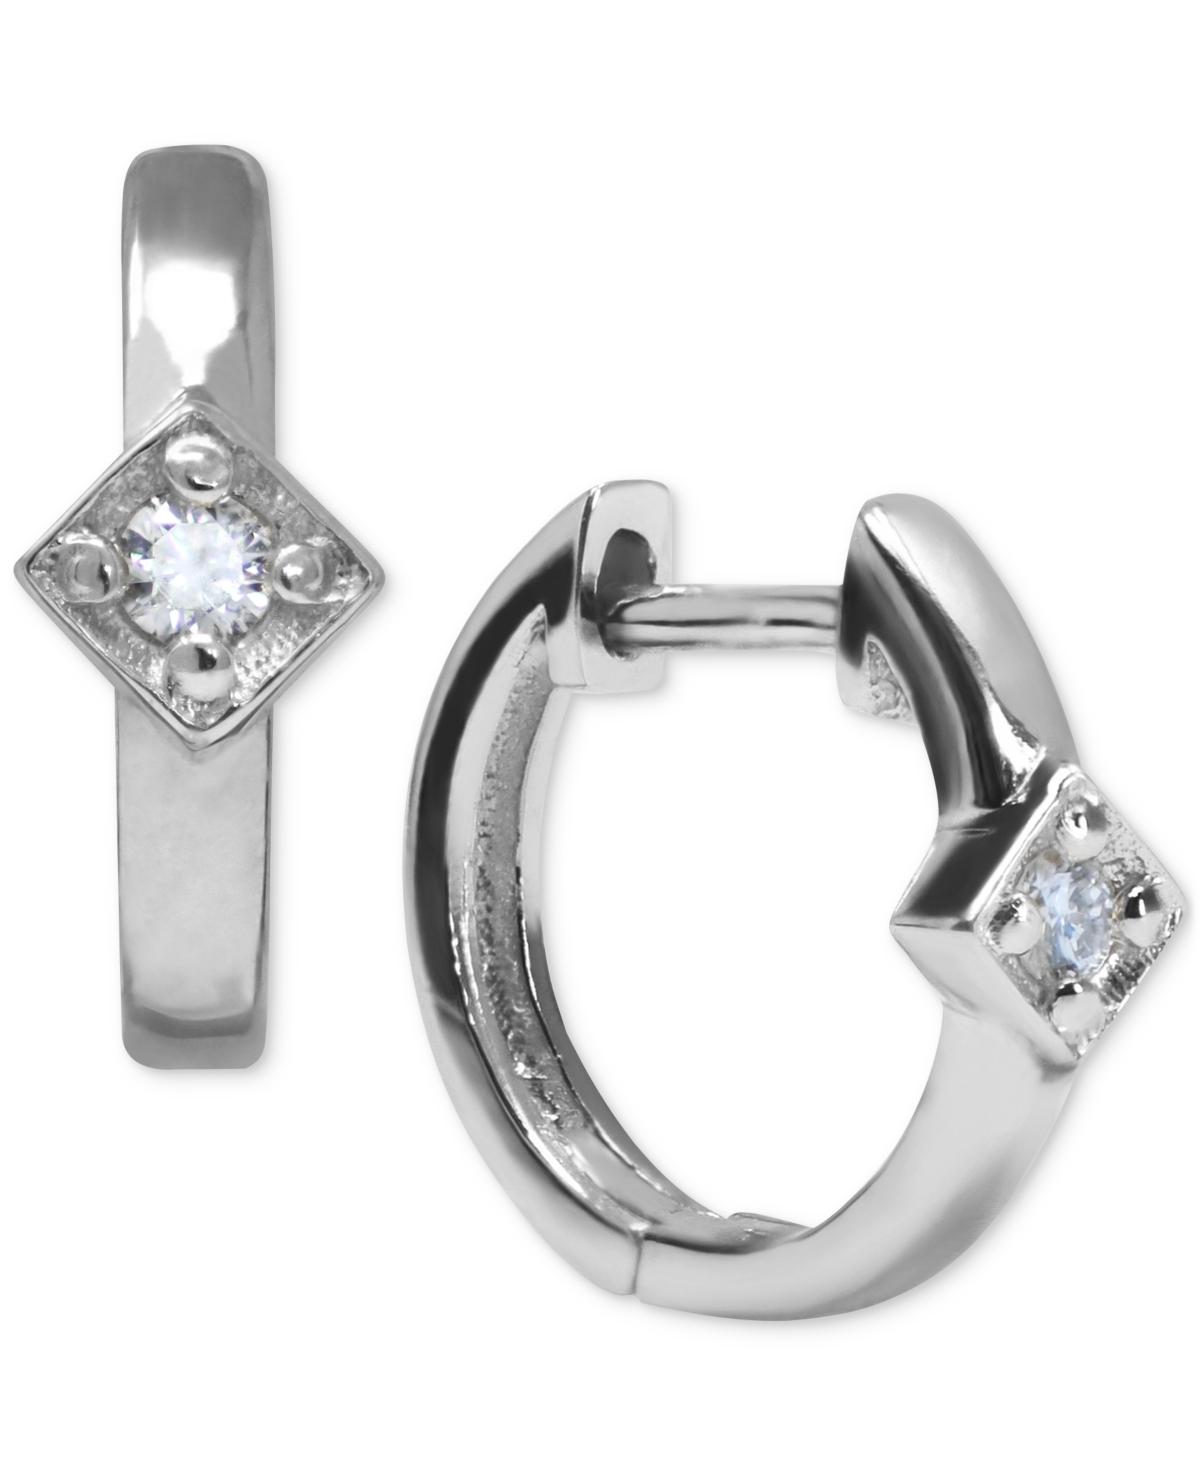 White Sapphire Accent Extra Small Huggie Hoop Earrings in Sterling Silver, 0.47" - Sterling Silver